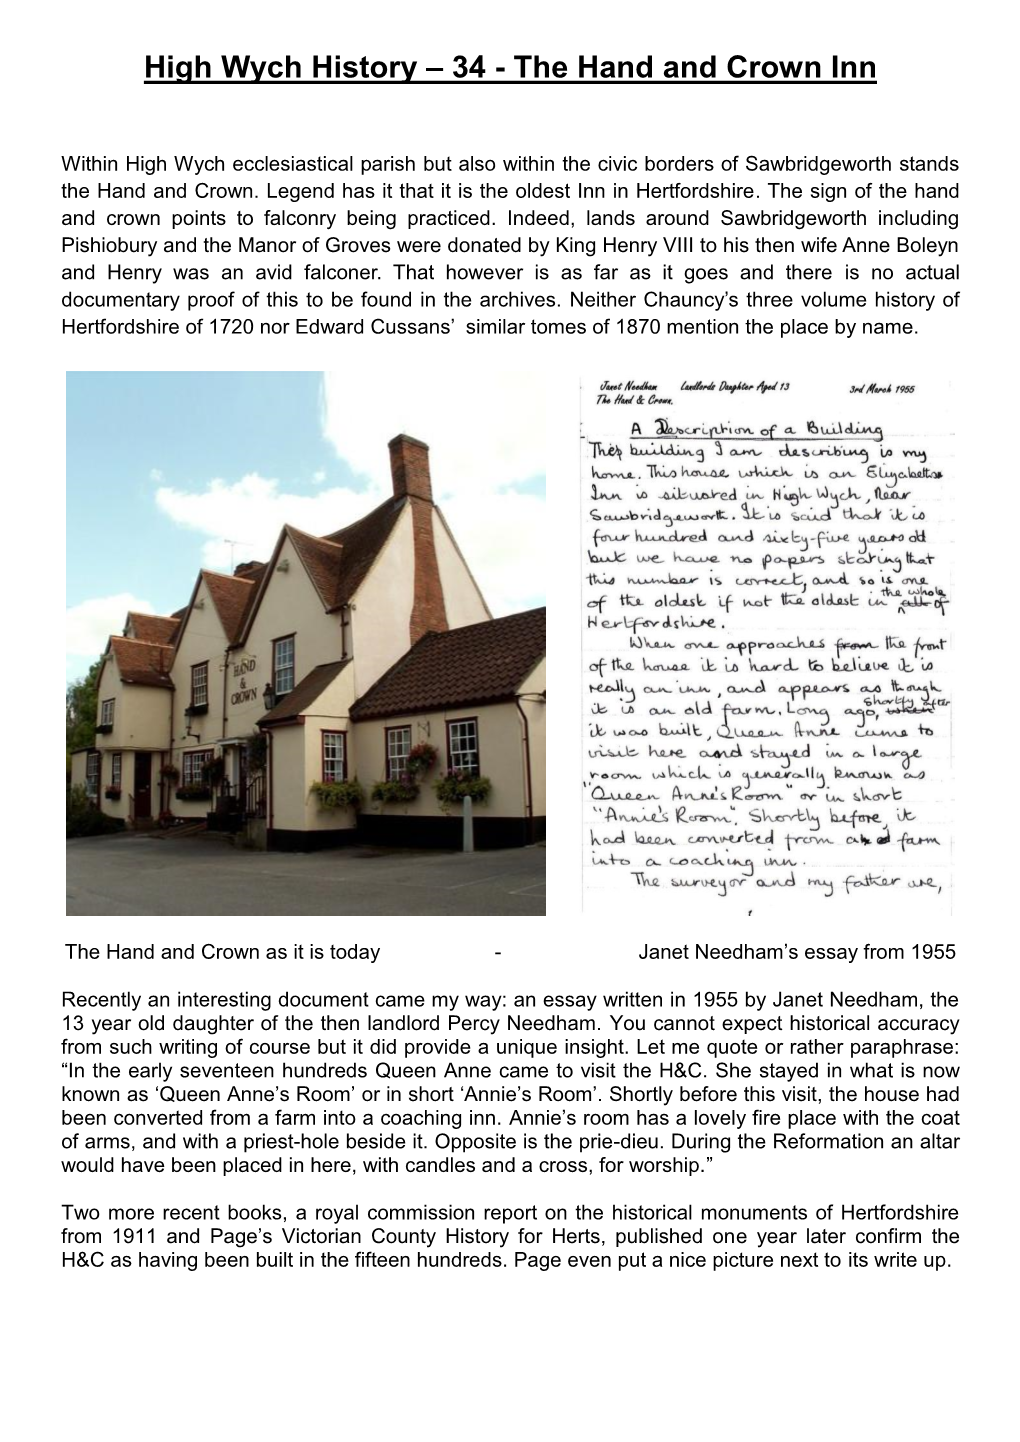 High Wych History – 34 - the Hand and Crown Inn